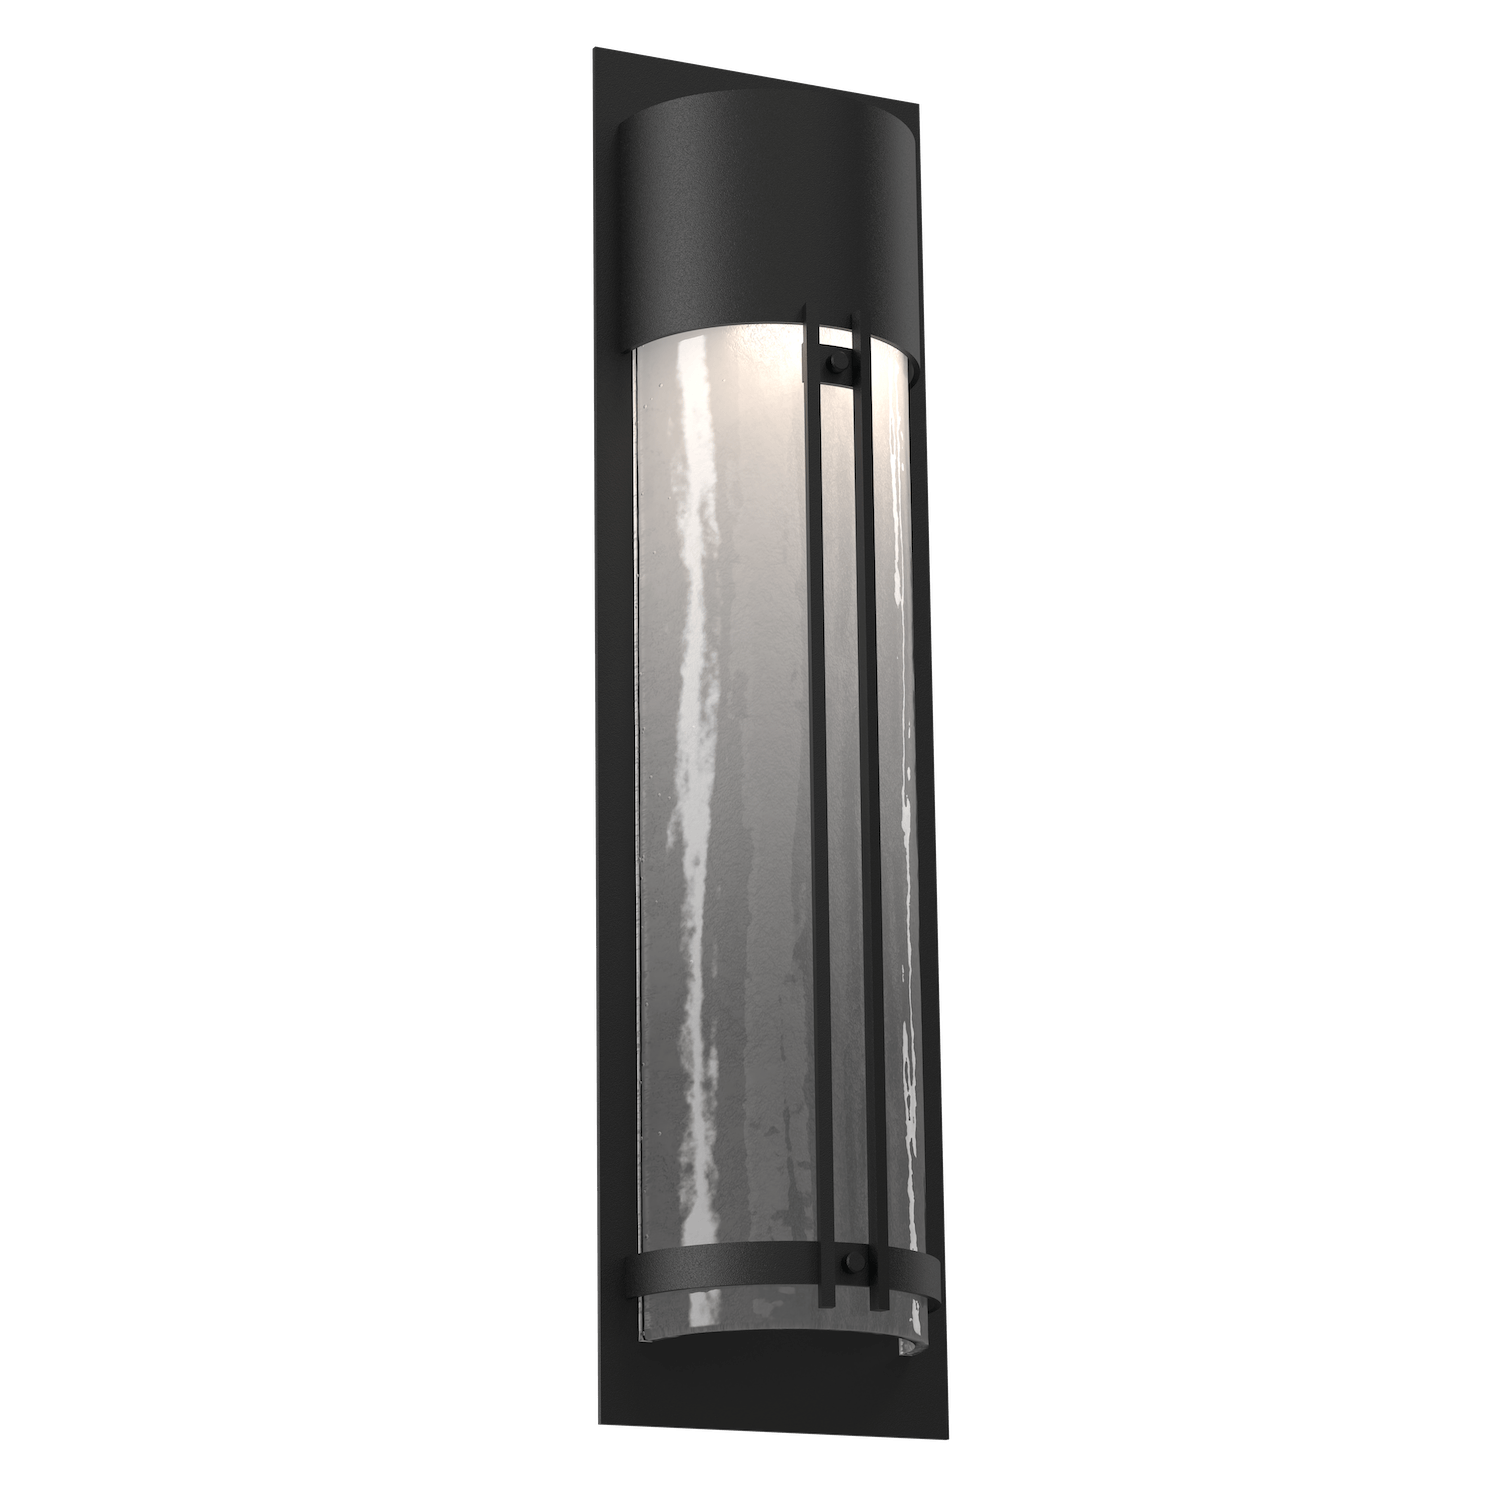 ODB0054-26-TB-FG-Hammerton-Studio-26-inch-outdoor-sconce-with-half-round-frosted-granite-glass-cover-with-textured-black-finish-and-LED-lamping